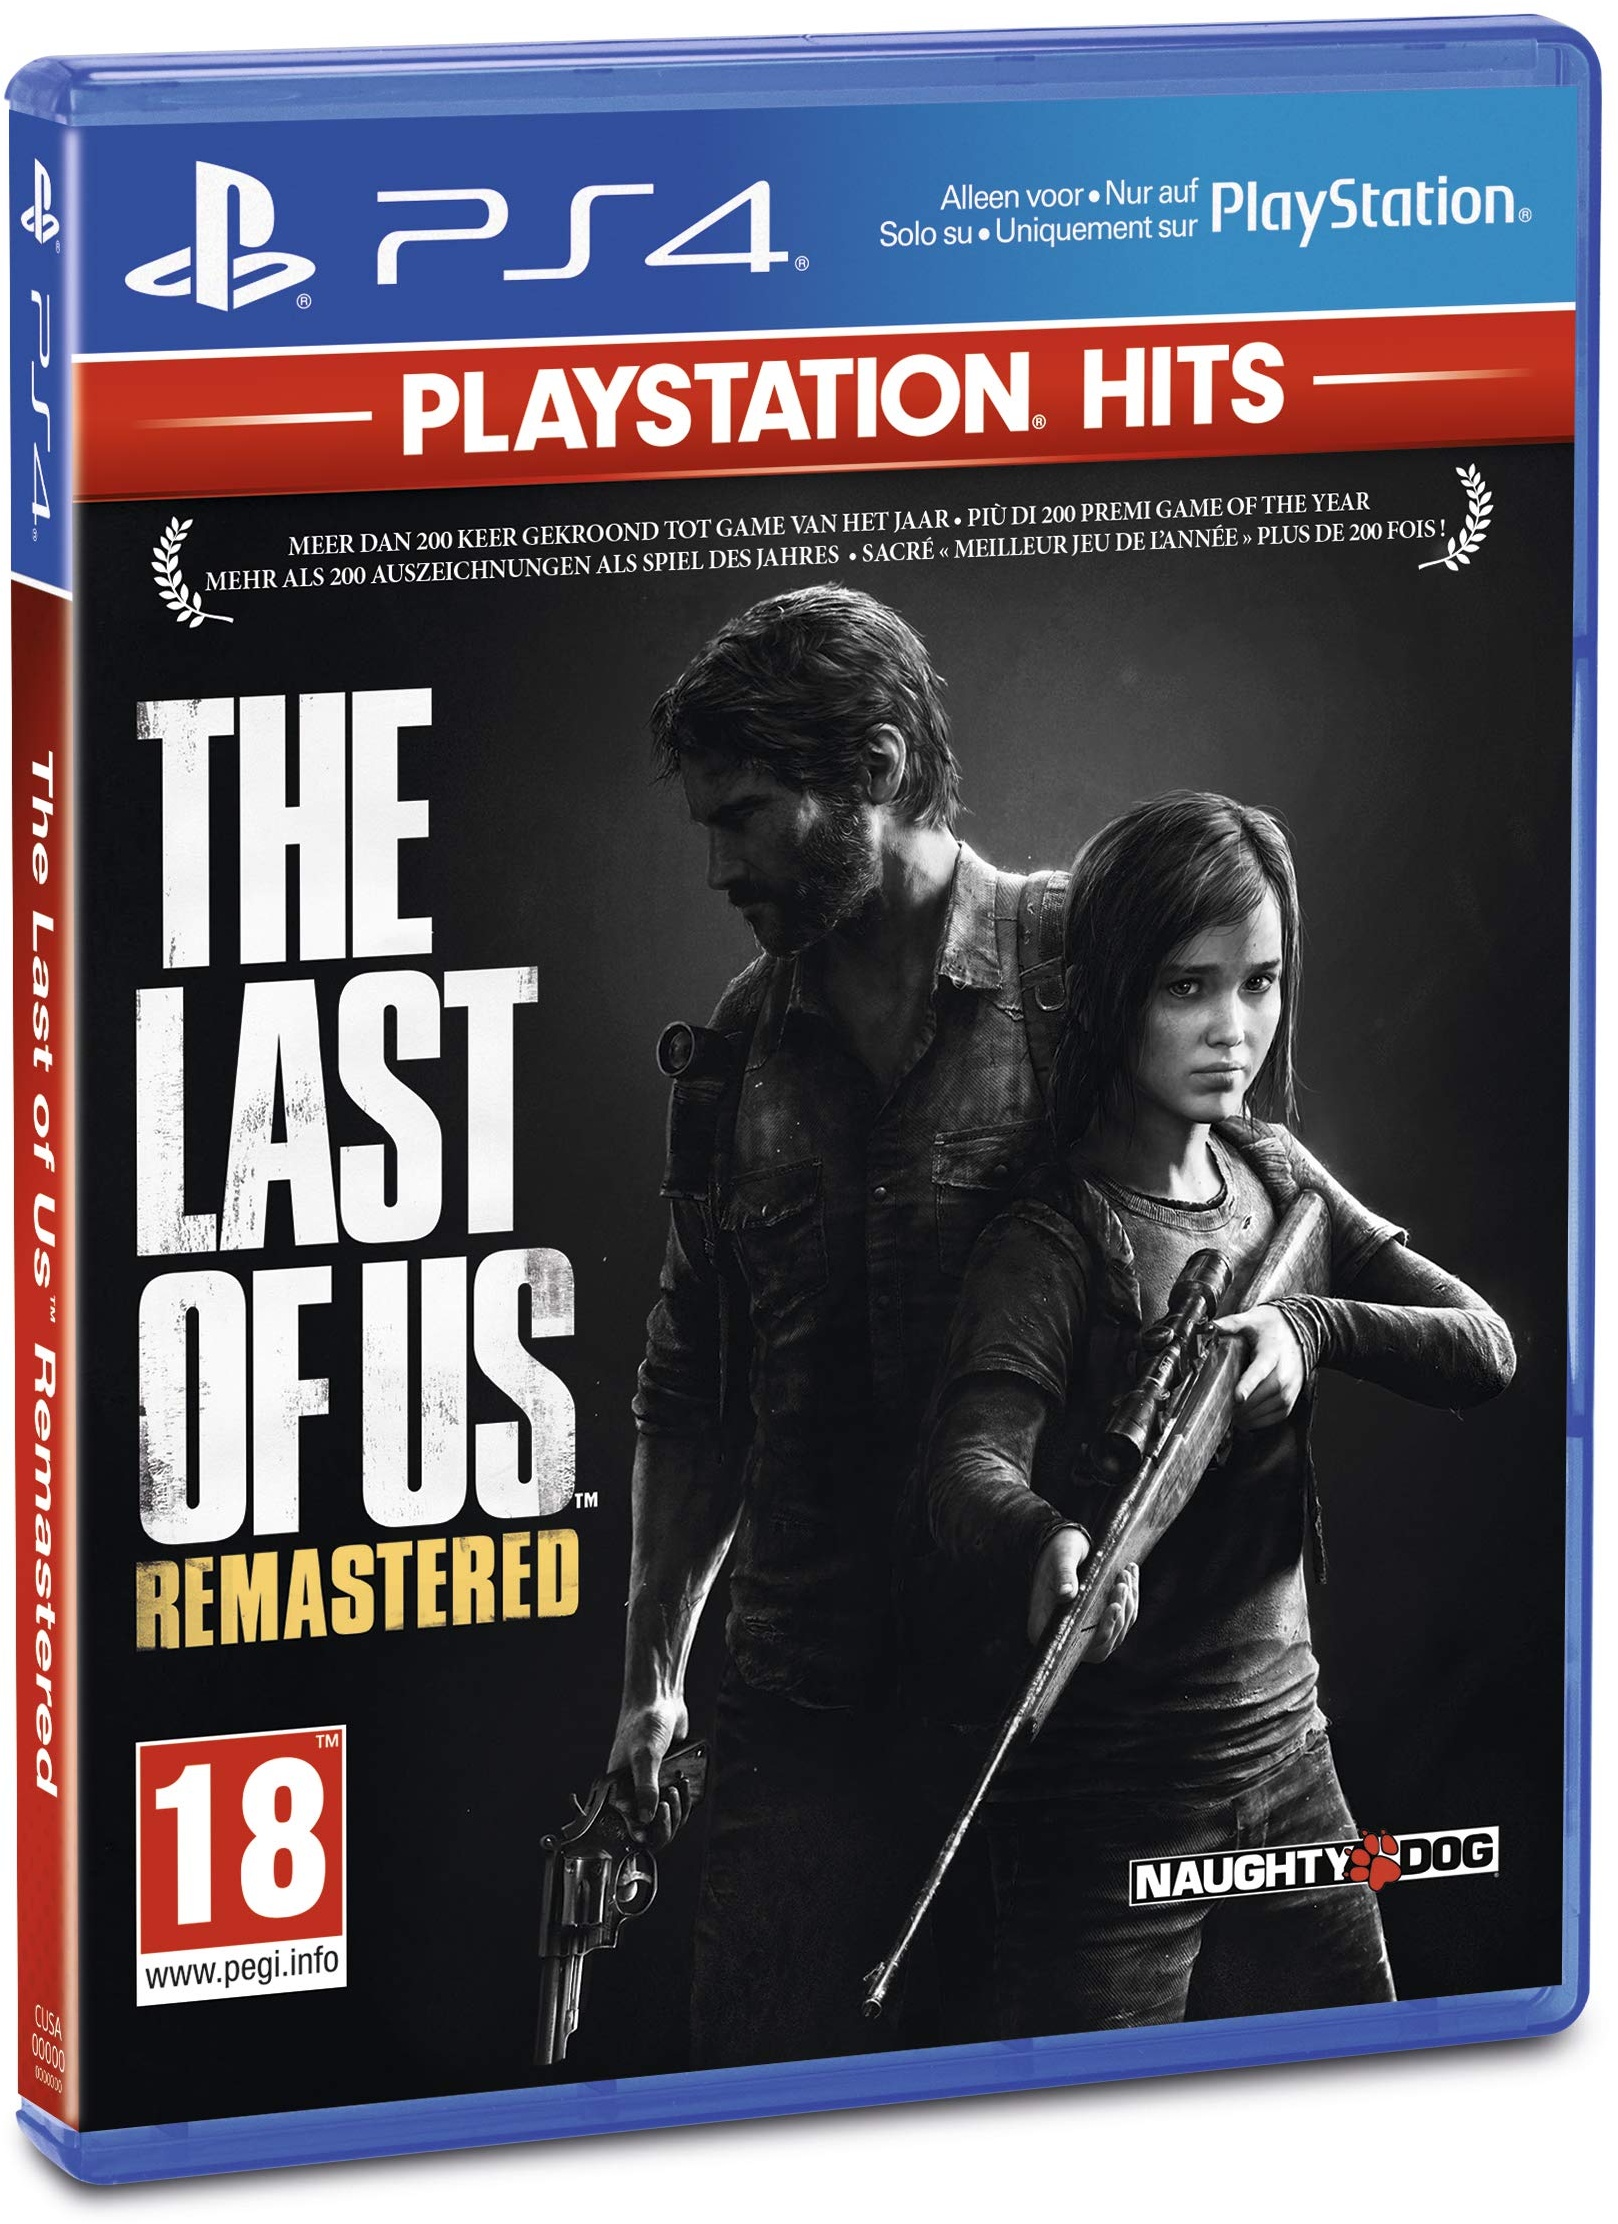 NONAME The Last of Us Remastered Hits (PS4 Only)